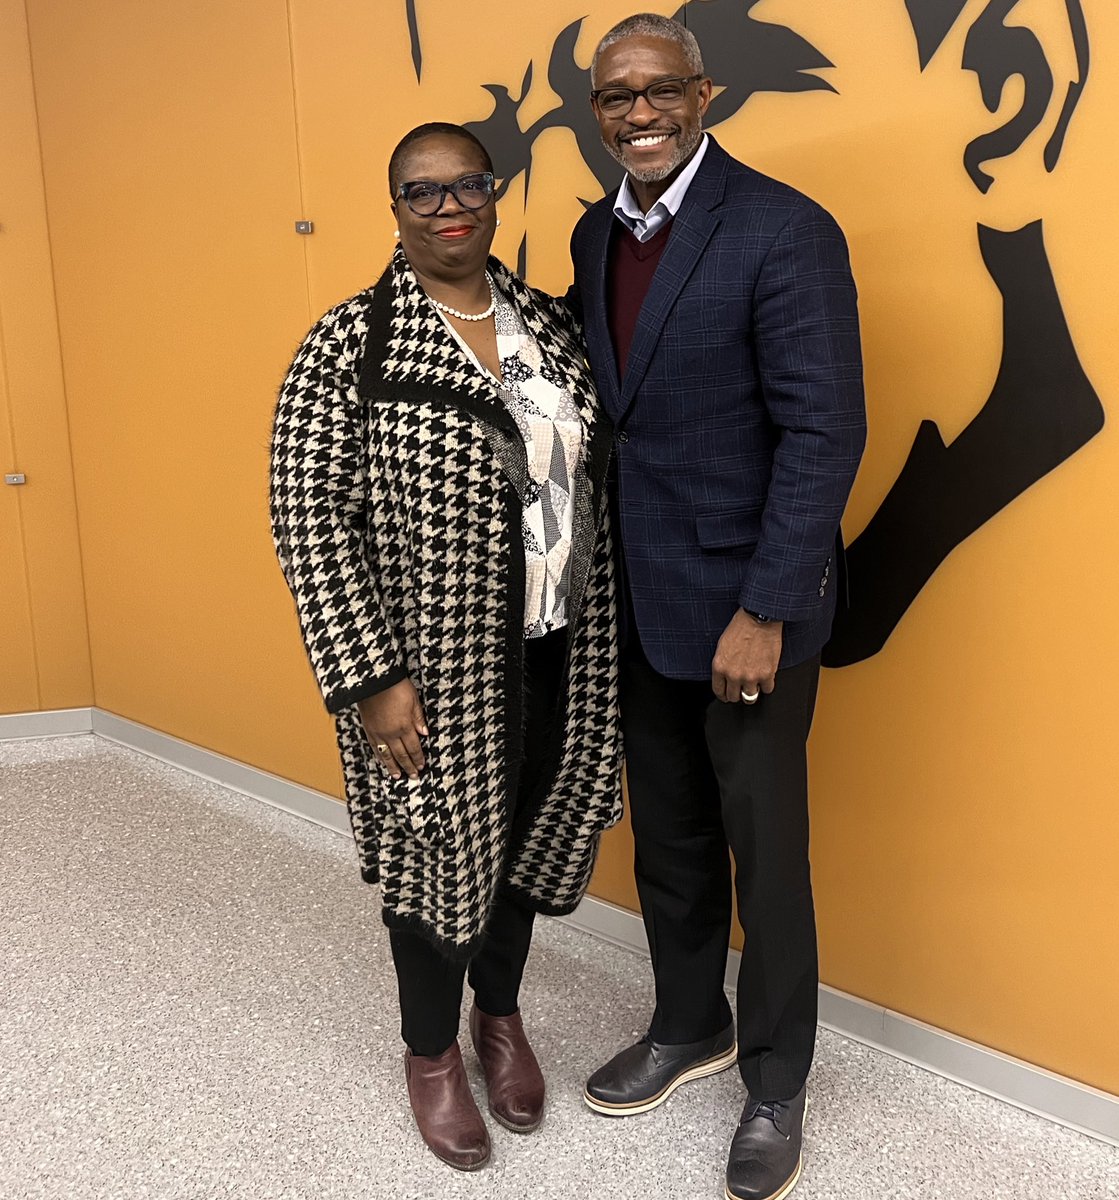 Day two in NYC consisted of two college visits. The first to St. Francis College, and the second to Medgar Evers College. The staff was incredibly welcoming and it was great learning more about their institution and sharing EBS’ mission. #EquineIndustry #NYRA #TalentPipeline